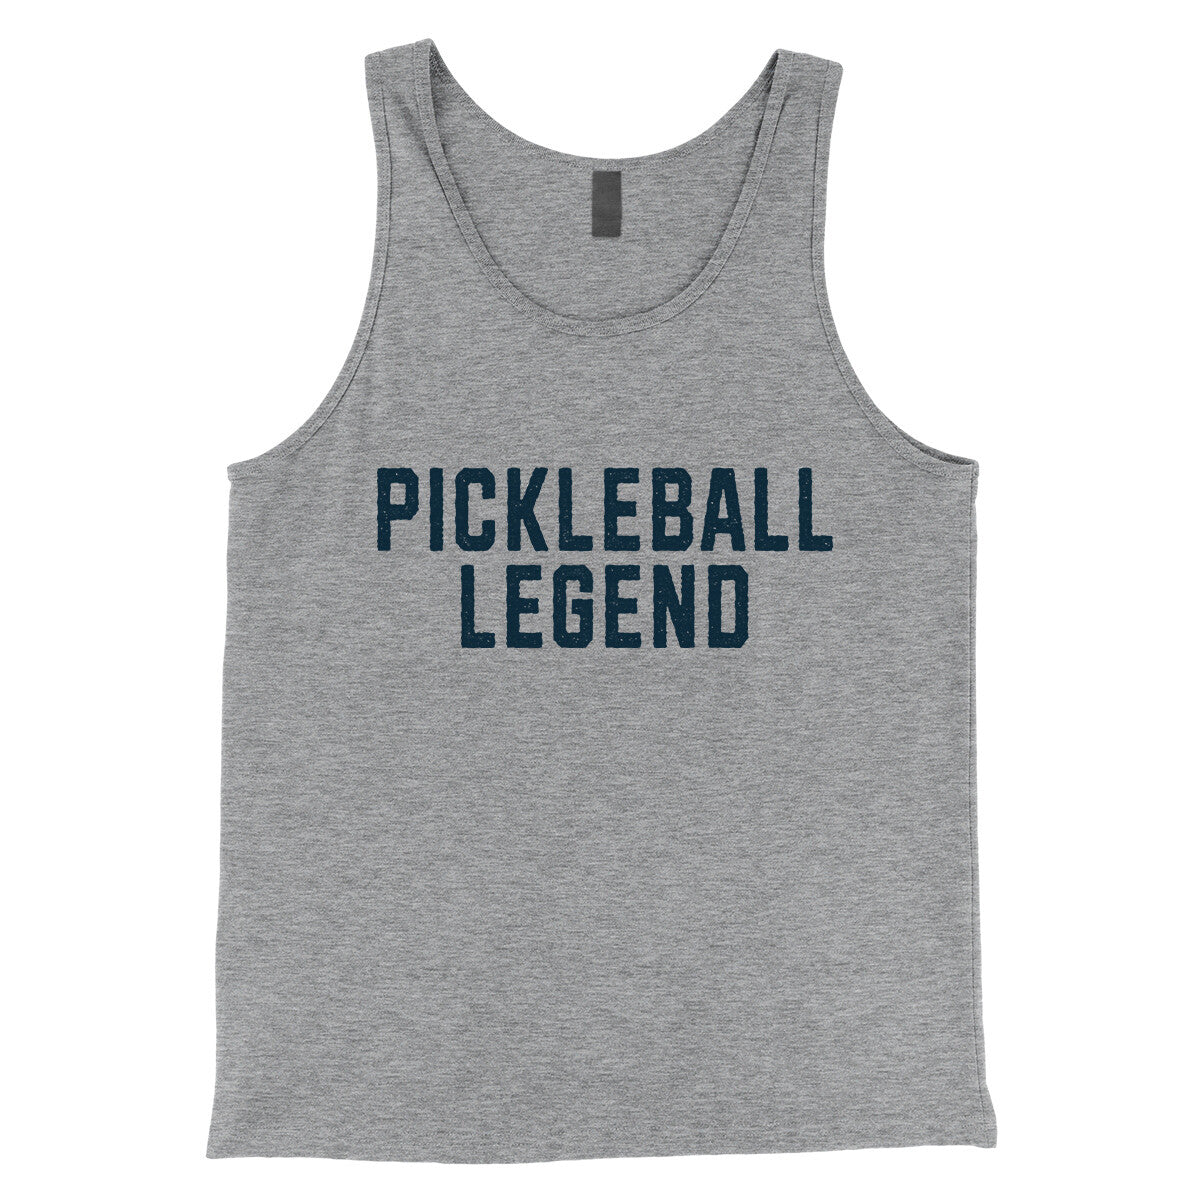 Pickleball Legend in Athletic Heather Color